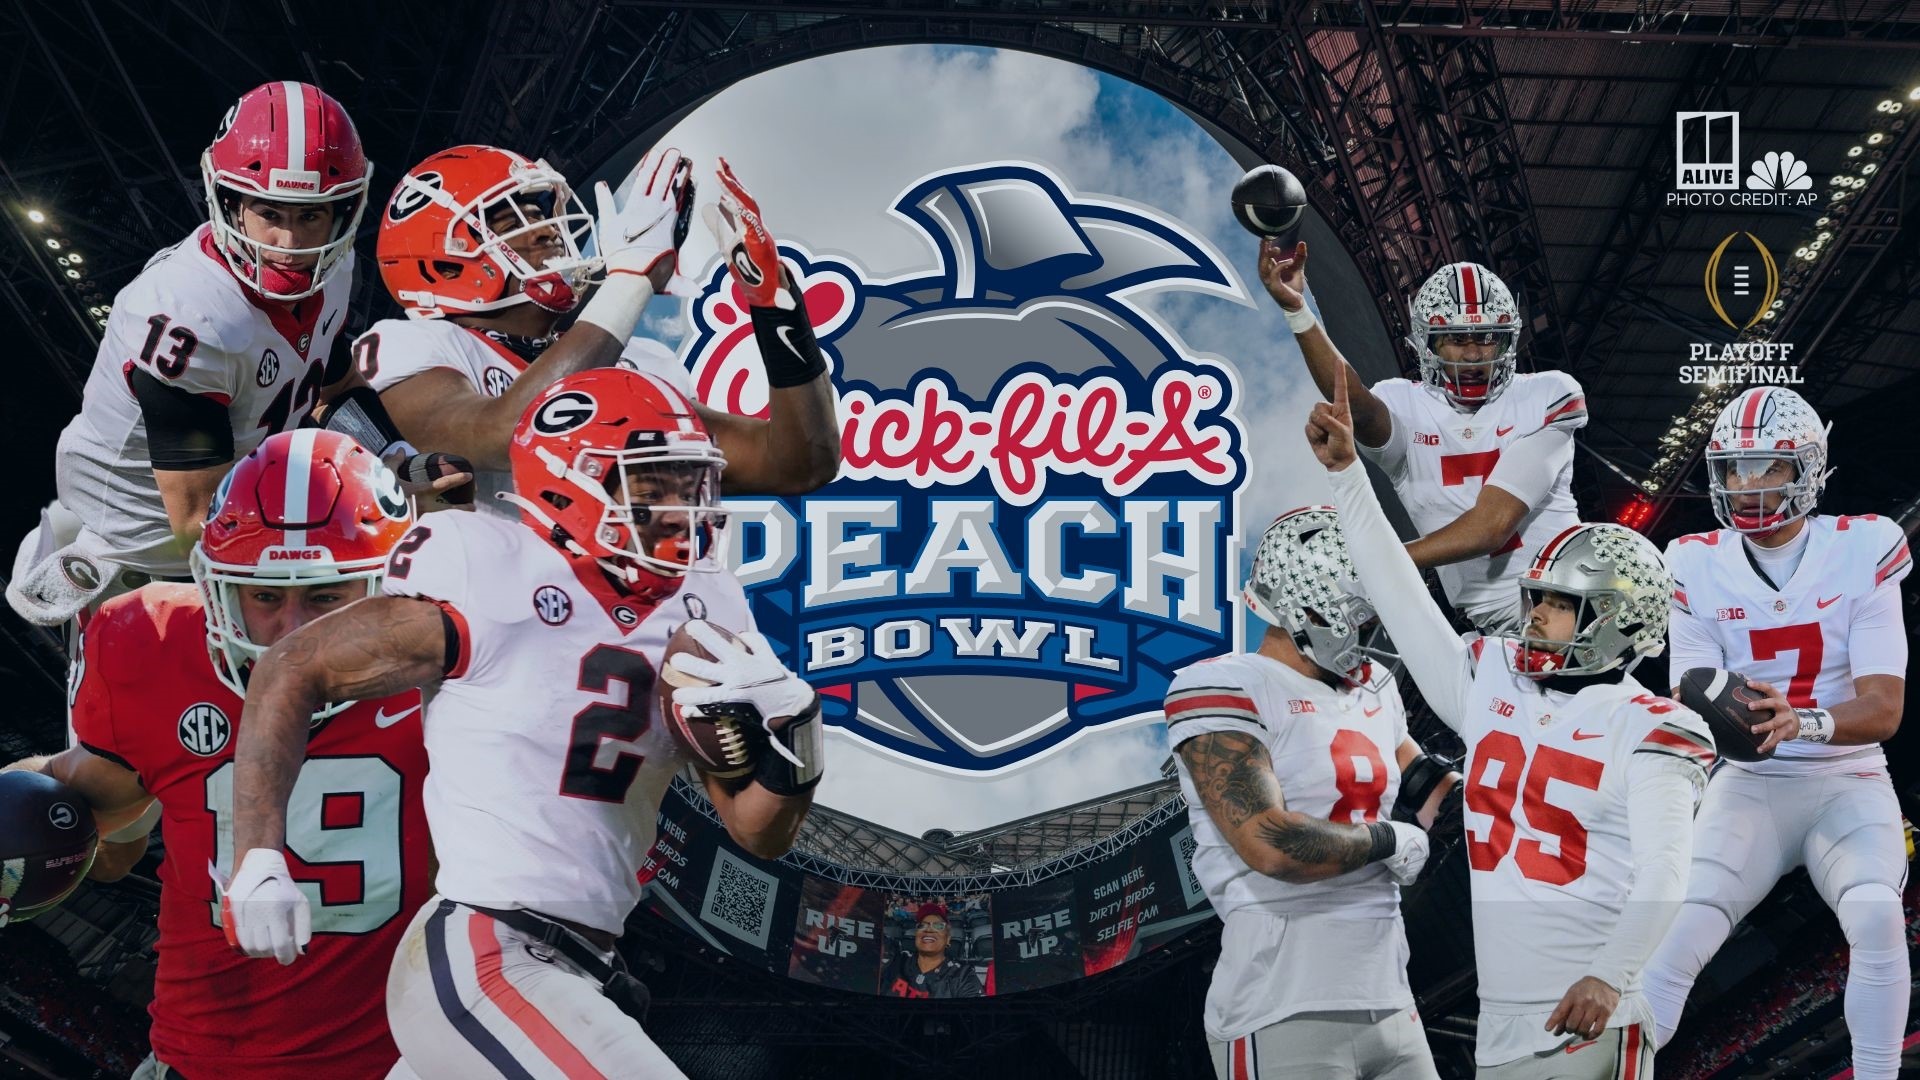 The Chick-fil-A Peach Bowl is set for New Year's Eve at Mercedes-Benz Stadium, serving as a semifinal for the College Football Playoff.